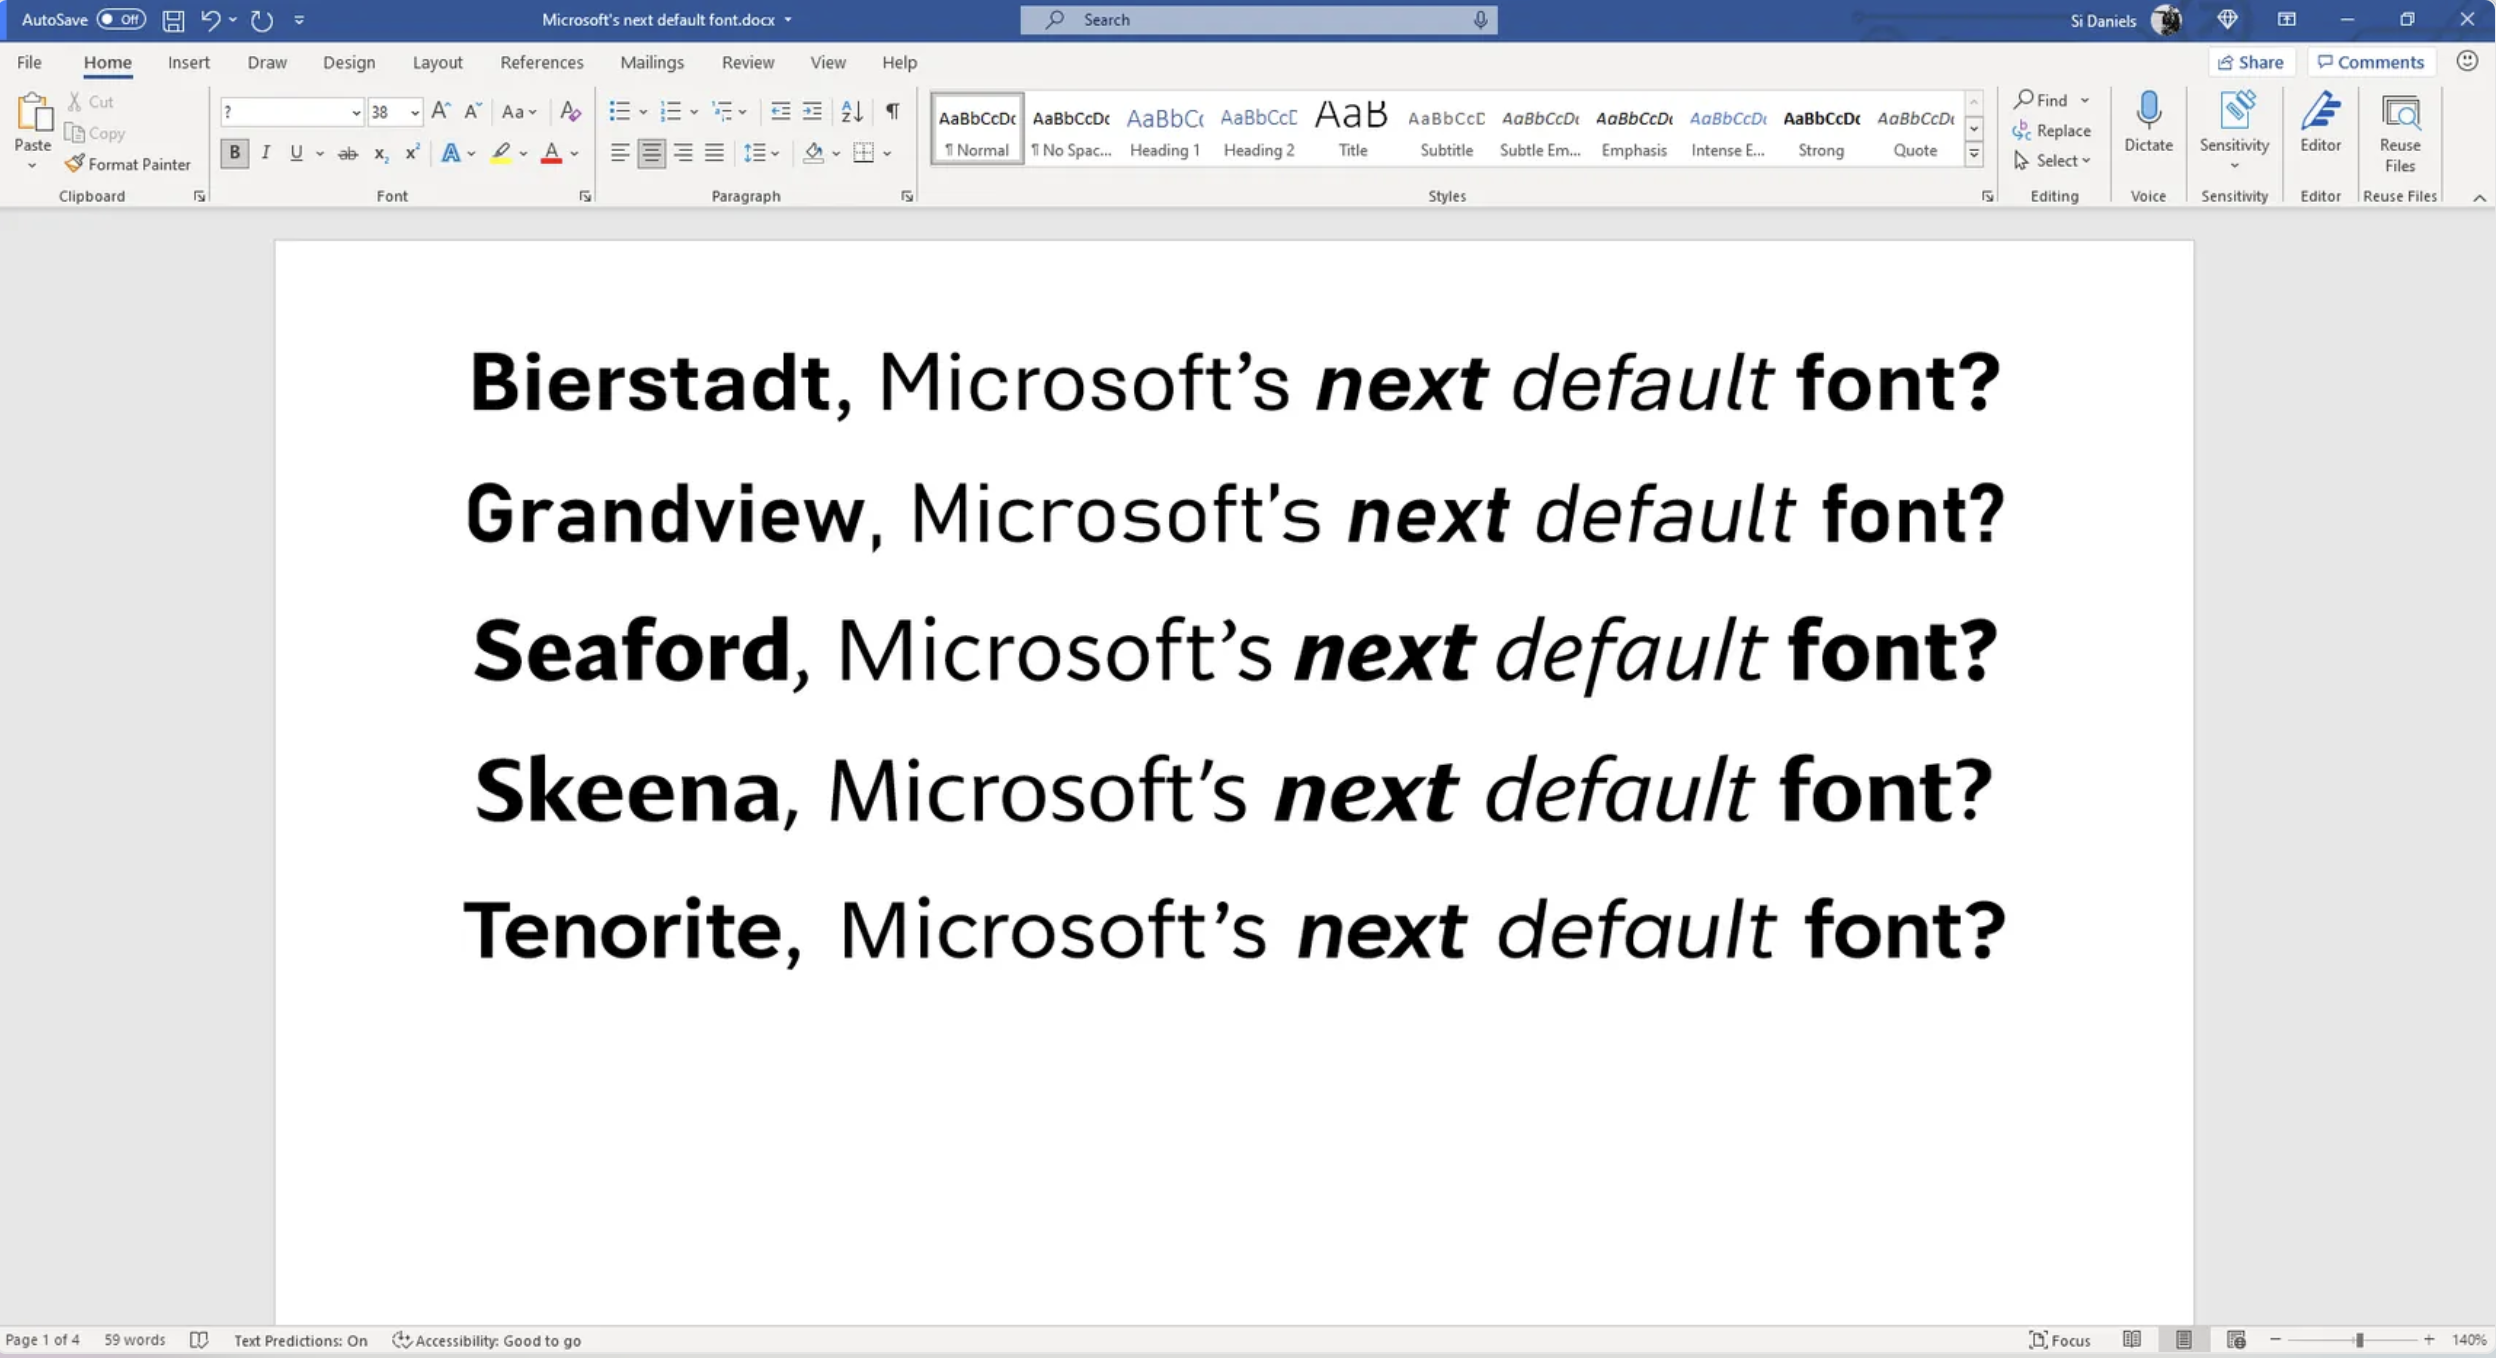 The five fonts that were vying to replace Calibri; Aptos is the font formerly known as Bierstadt.